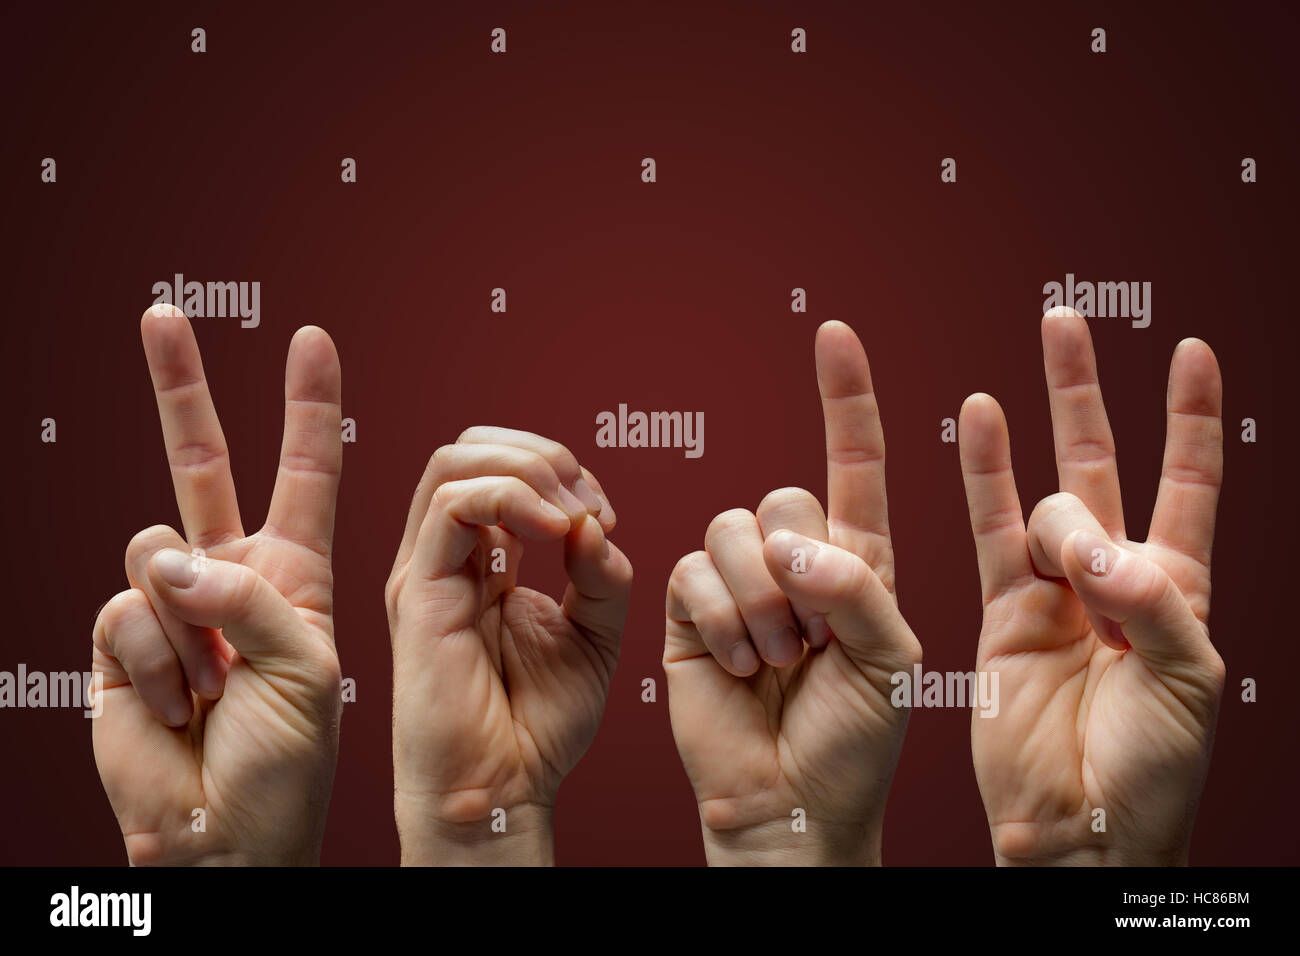 New Year 2017 in sign language over dark red background Stock Photo